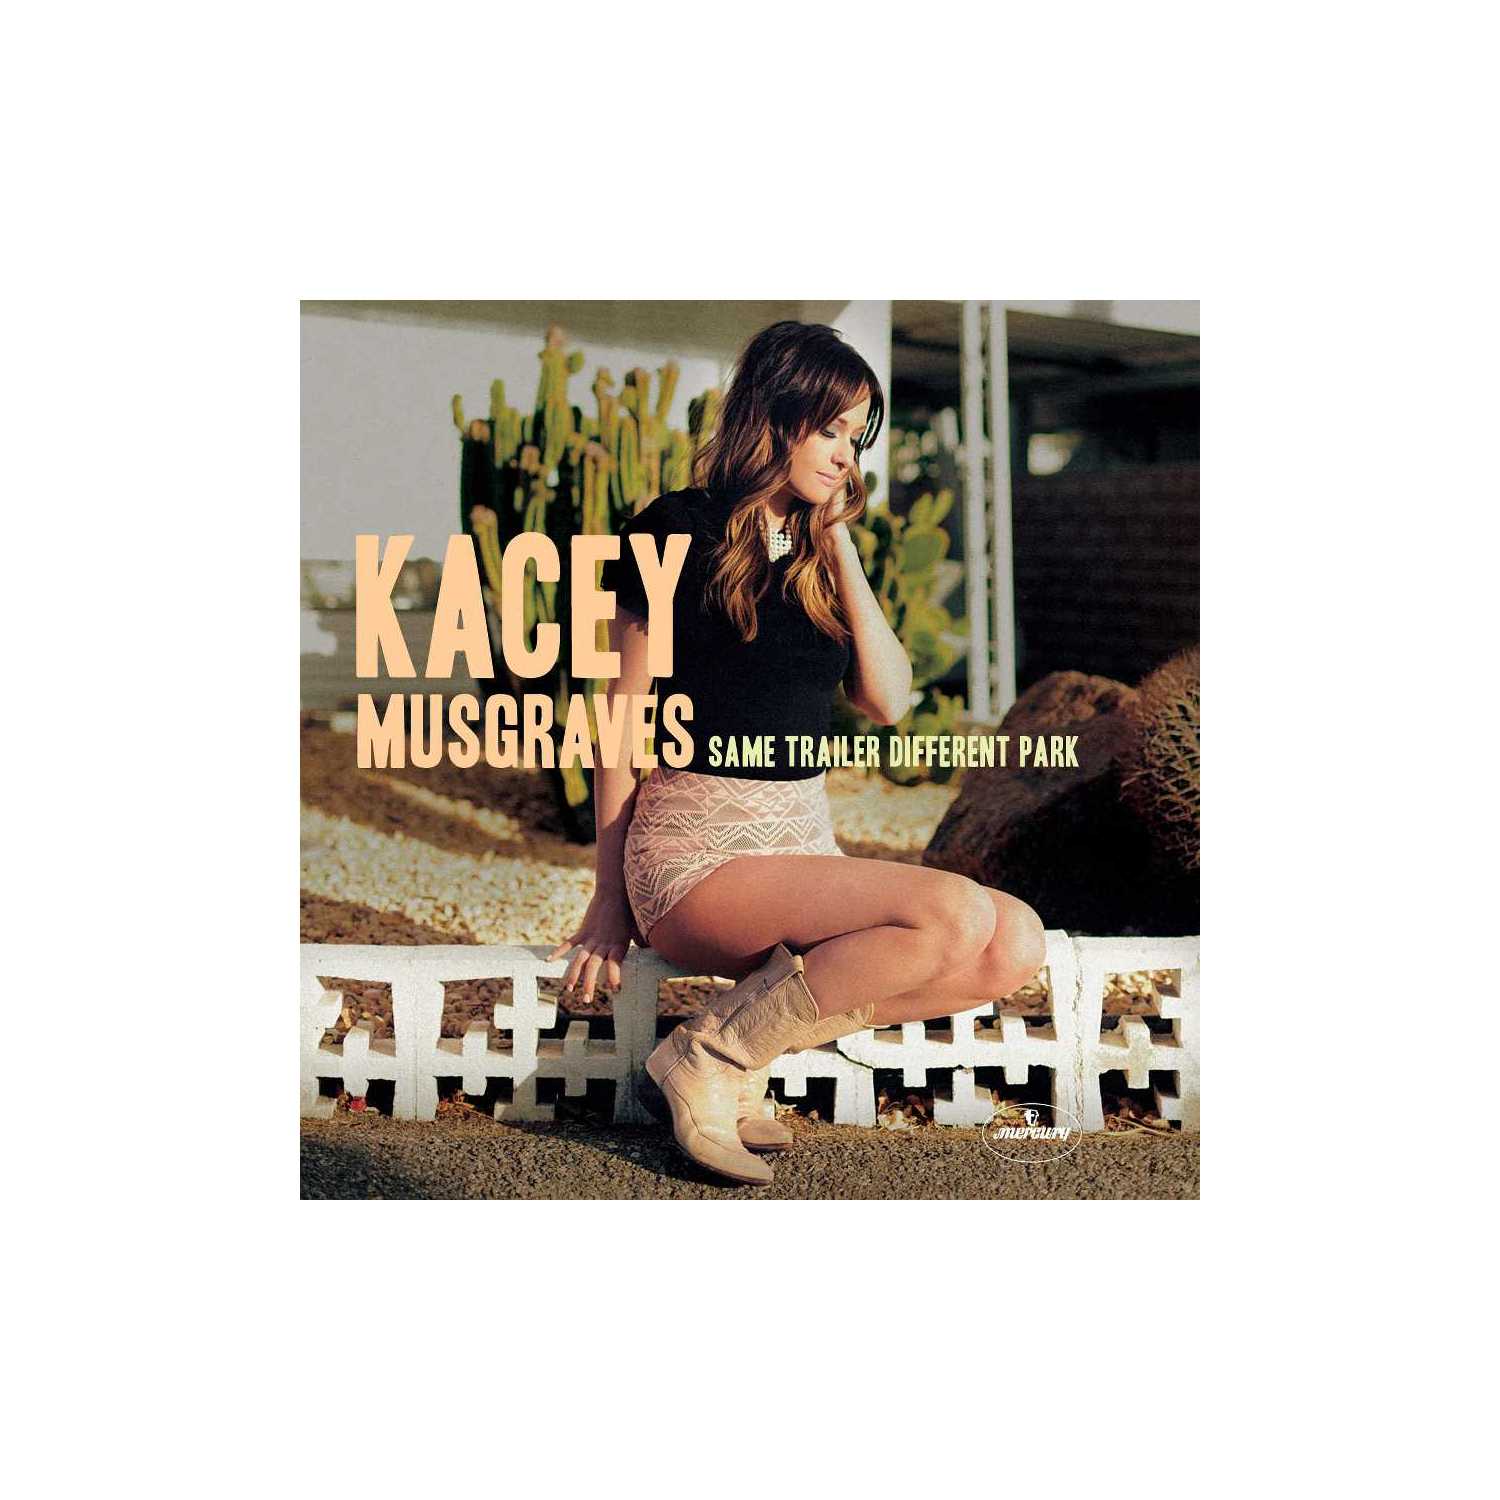 SAME TRAILER DIFFERE -- MUSGRAVES KACEY